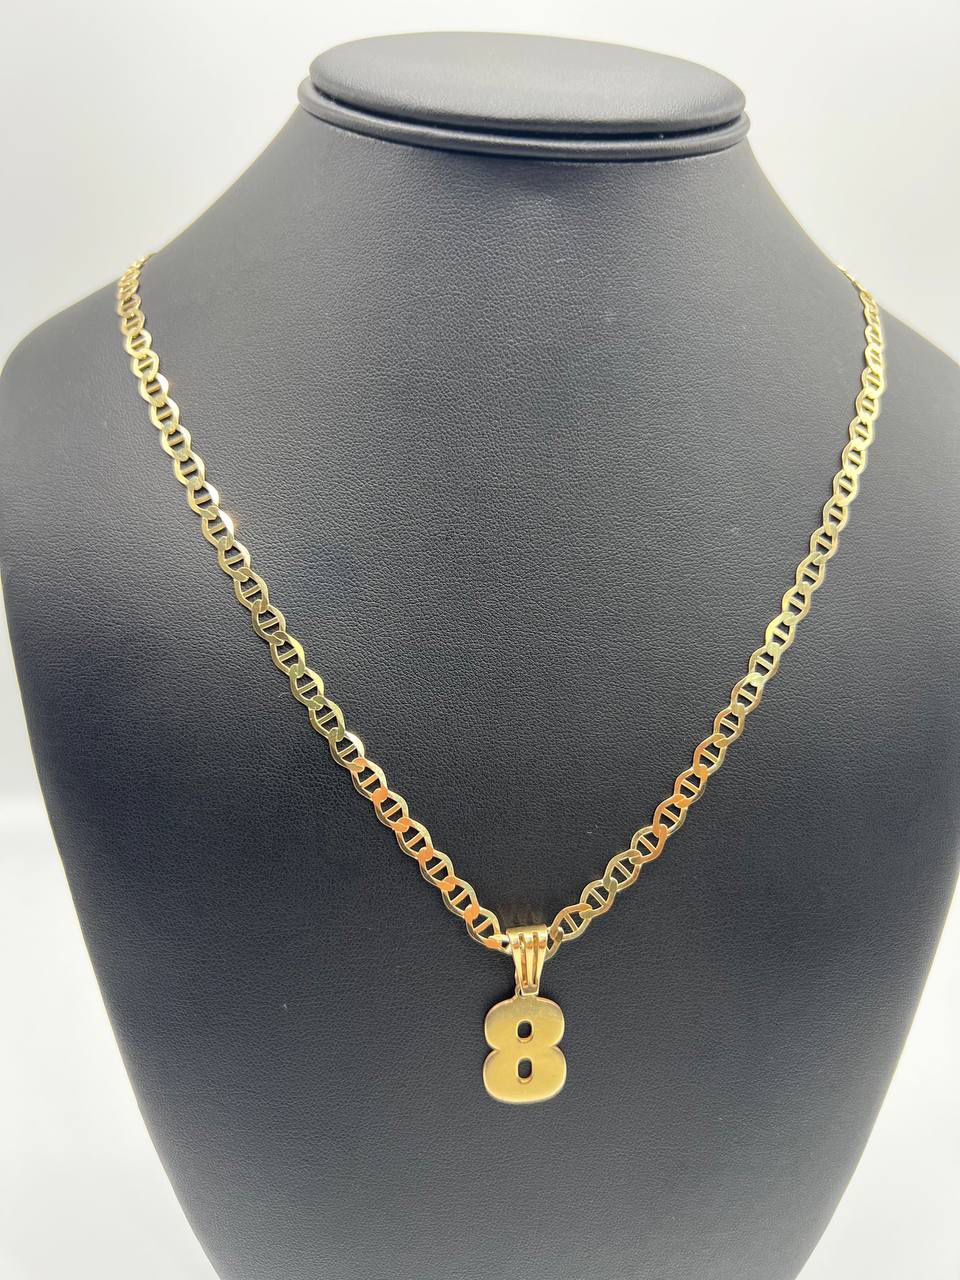 10k solid gold Mariner necklace chain with number "8" pendant made of 10k solid gold